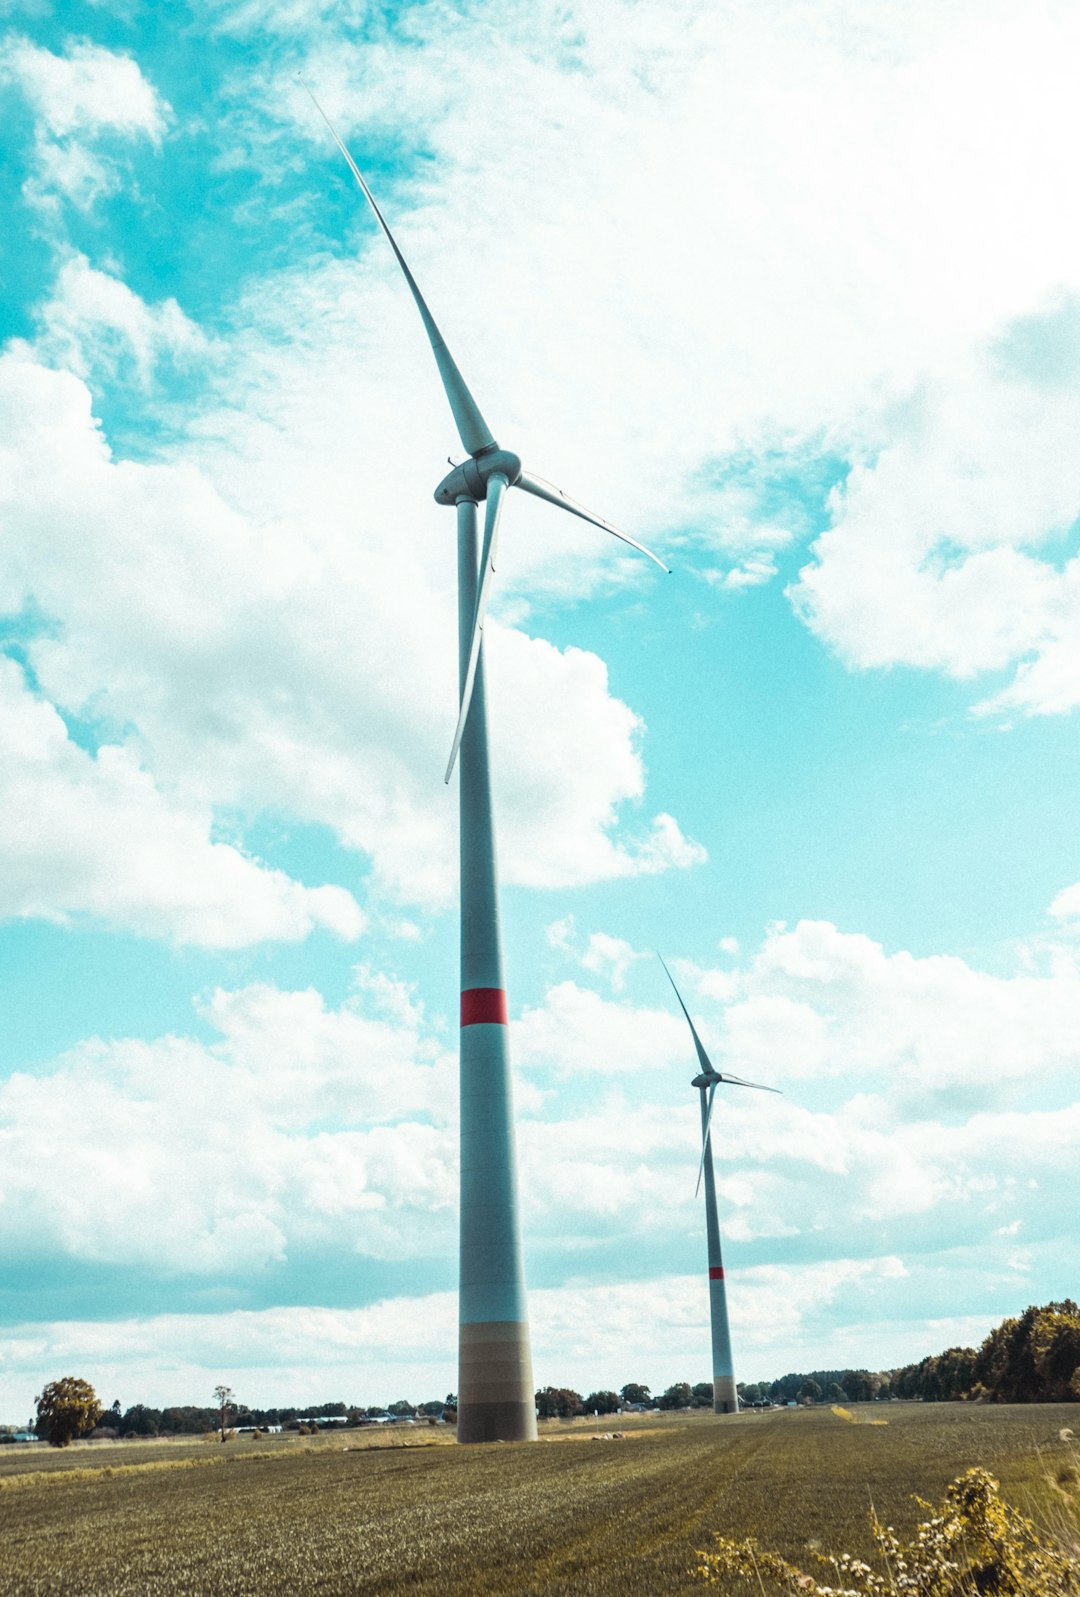 white wind turbine under blue sky and white clouds during daytime